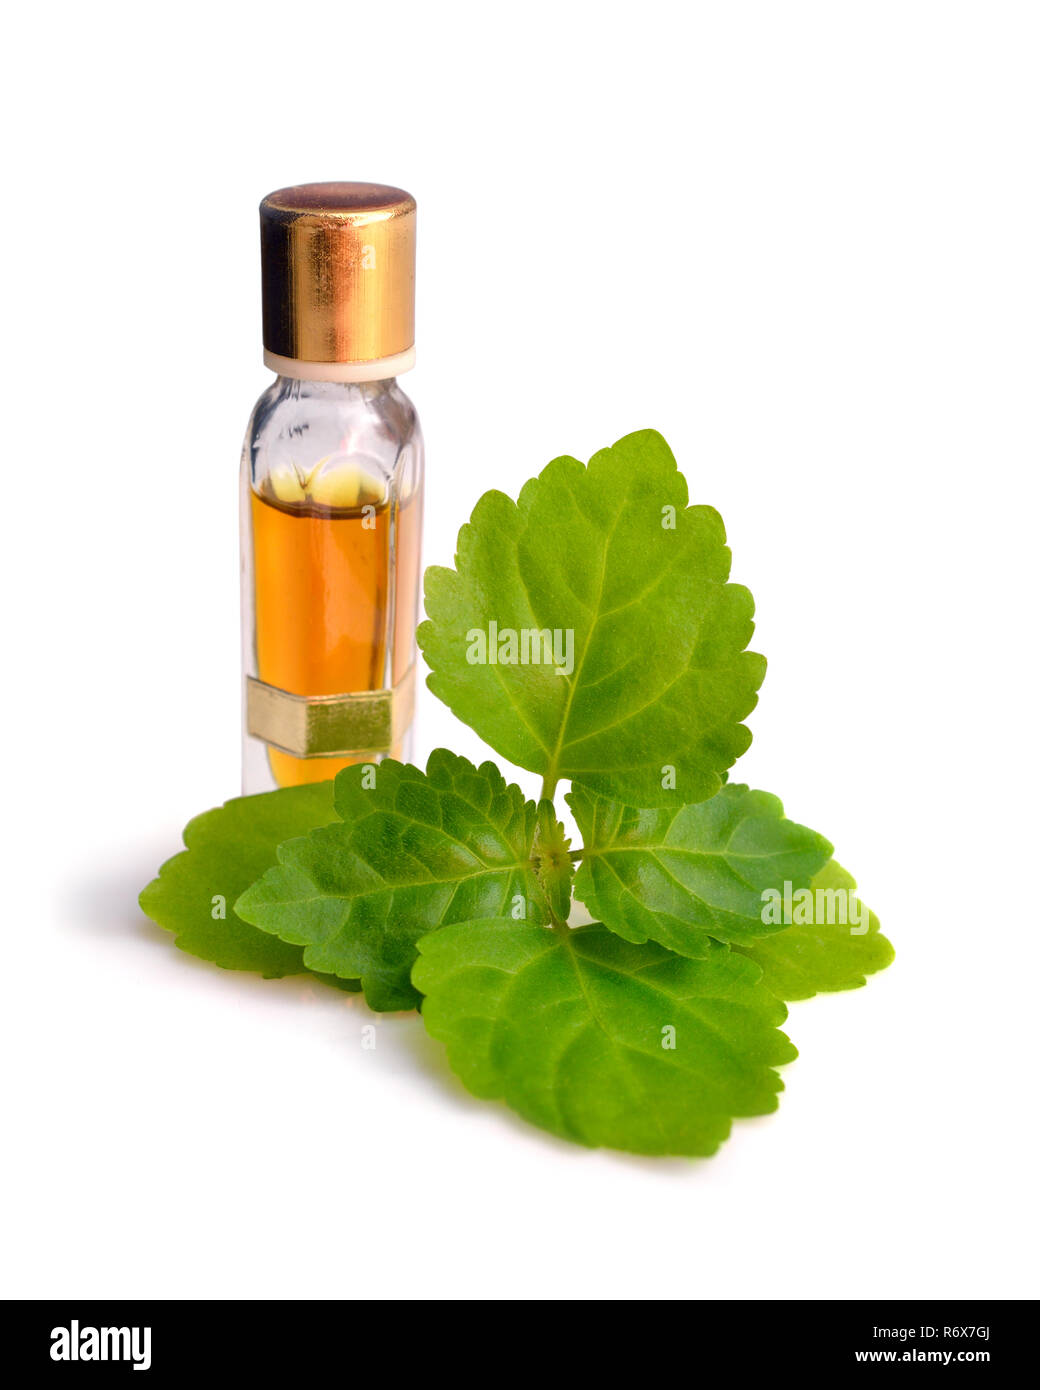 Patchouli sprig with essential oil. Isolated on white background. Stock Photo